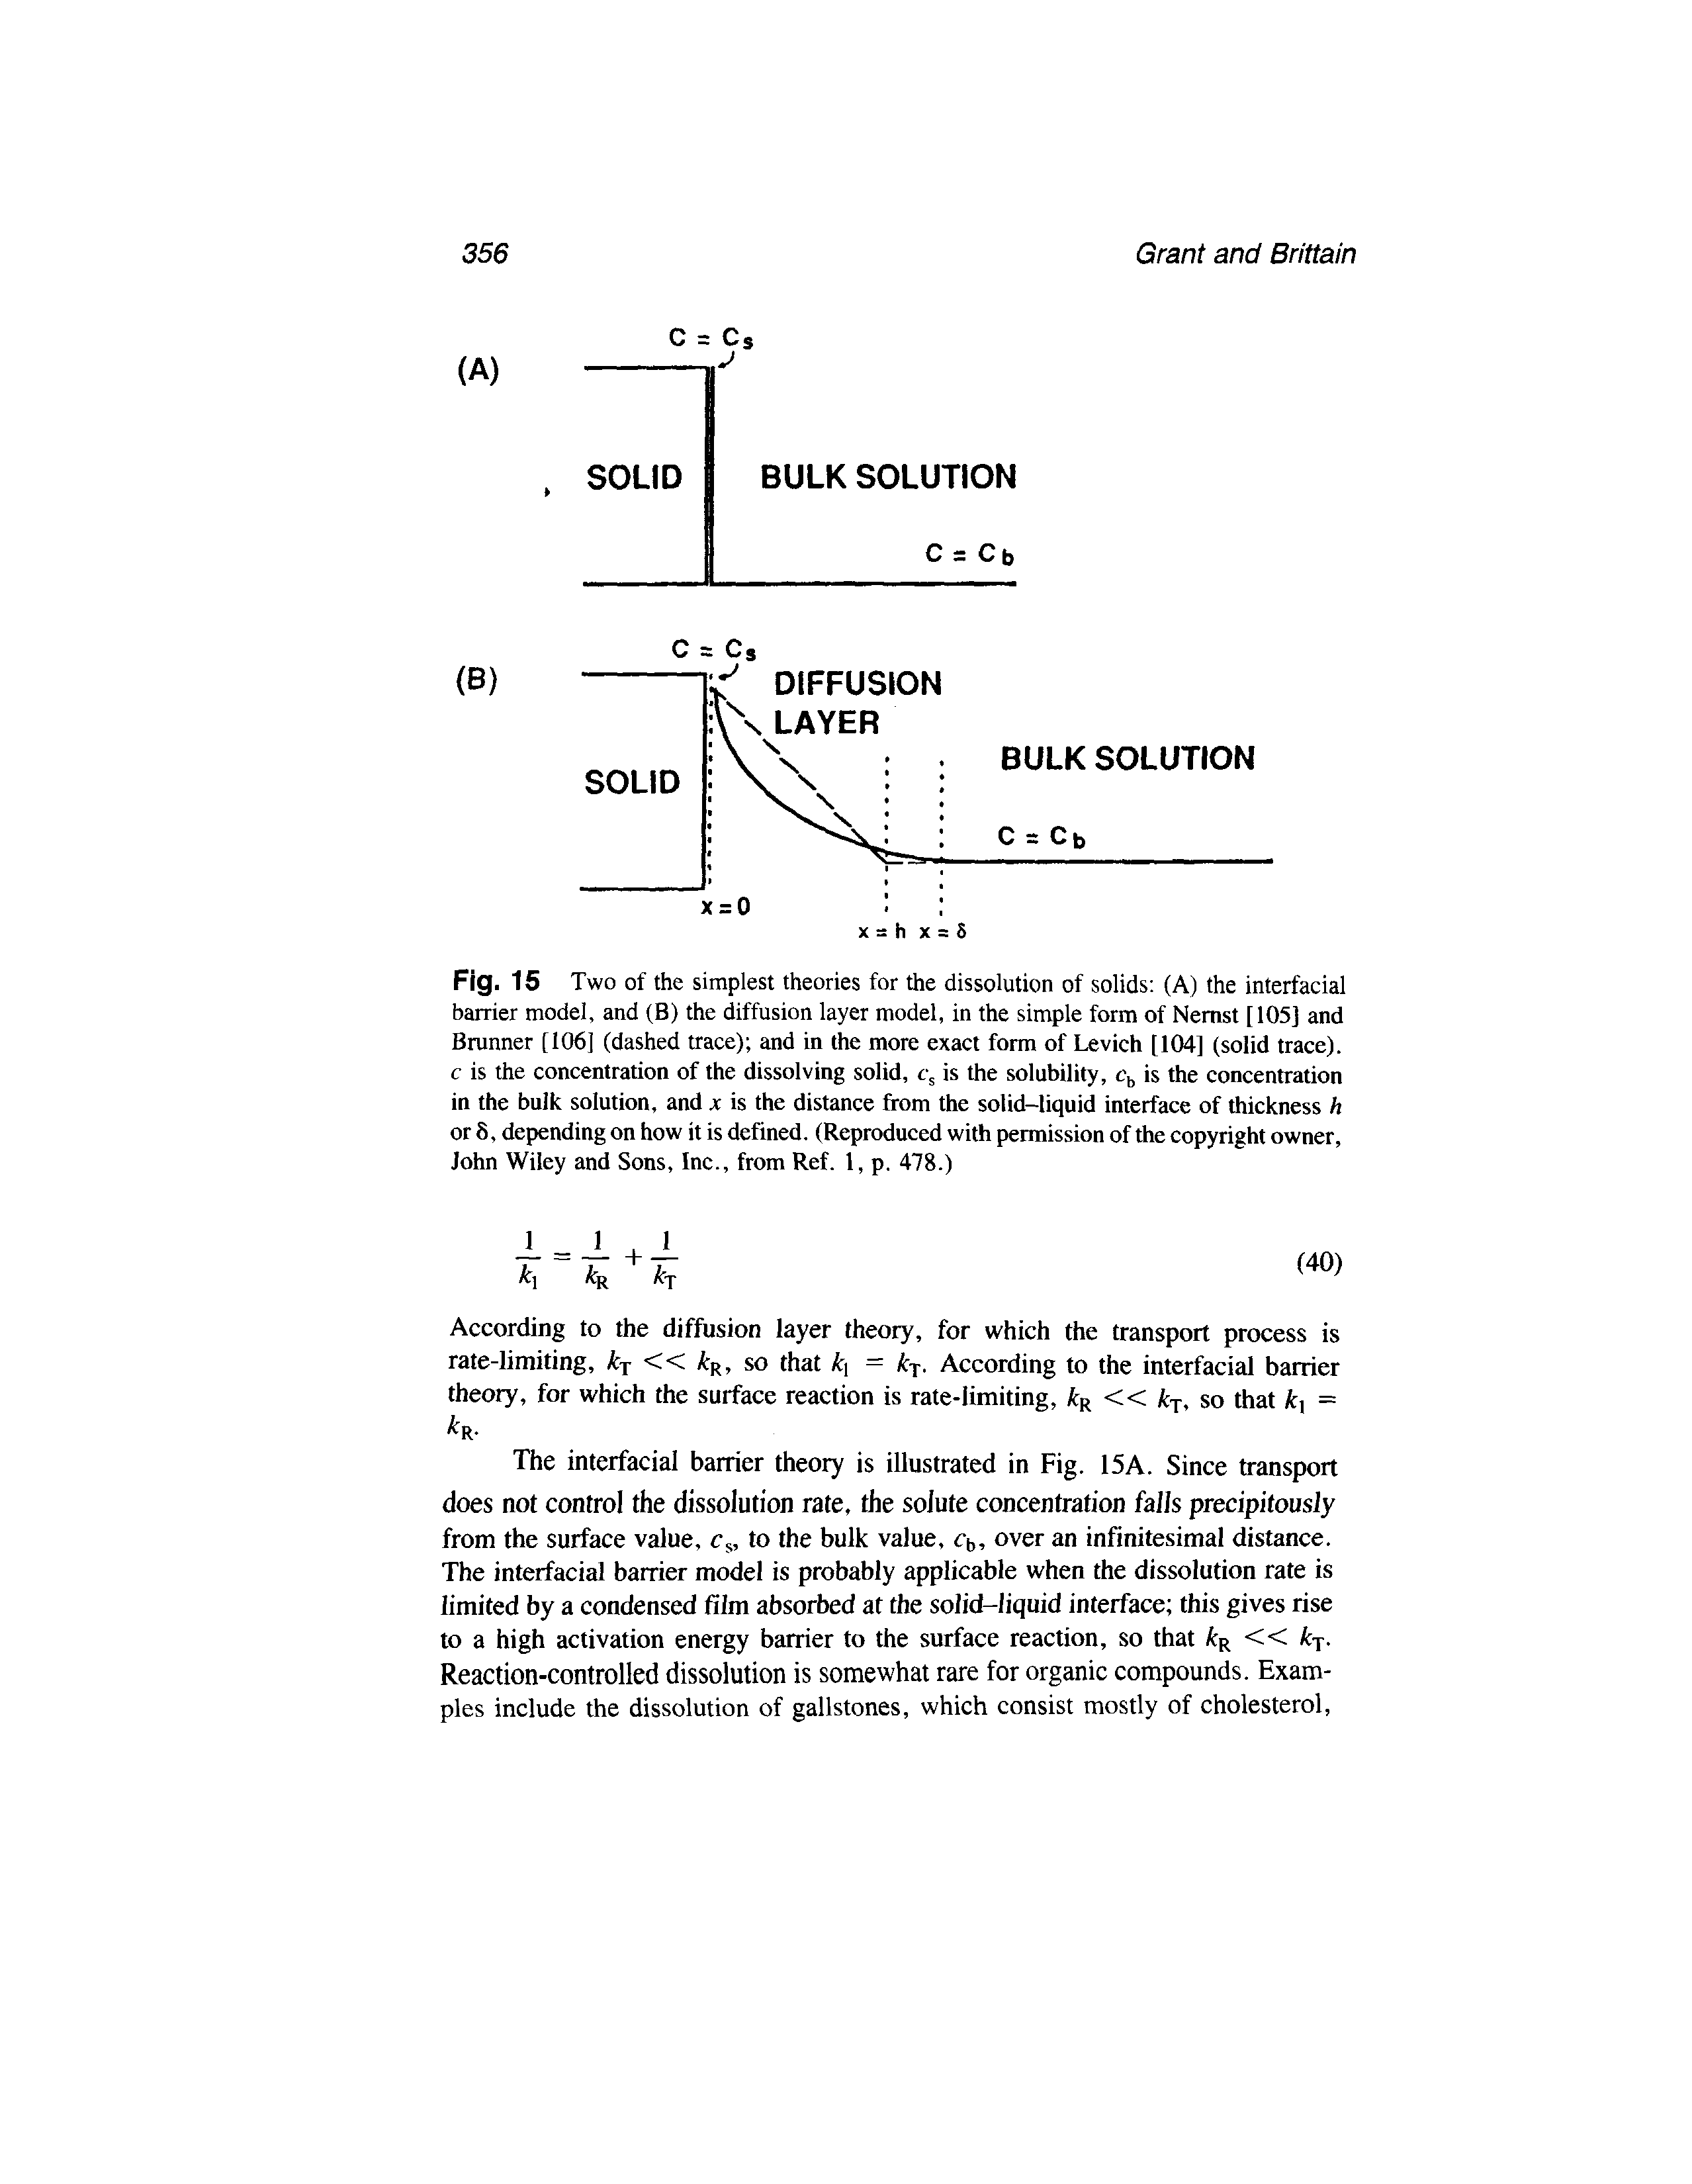 Fig. 15 Two of the simplest theories for the dissolution of solids (A) the interfacial barrier model, and (B) the diffusion layer model, in the simple form of Nemst [105] and Brunner [106] (dashed trace) and in the more exact form of Levich [104] (solid trace). c is the concentration of the dissolving solid, cs is the solubility, cb is the concentration in the bulk solution, and x is the distance from the solid-liquid interface of thickness h or 8, depending on how it is defined. (Reproduced with permission of the copyright owner, John Wiley and Sons, Inc., from Ref. 1, p. 478.)...